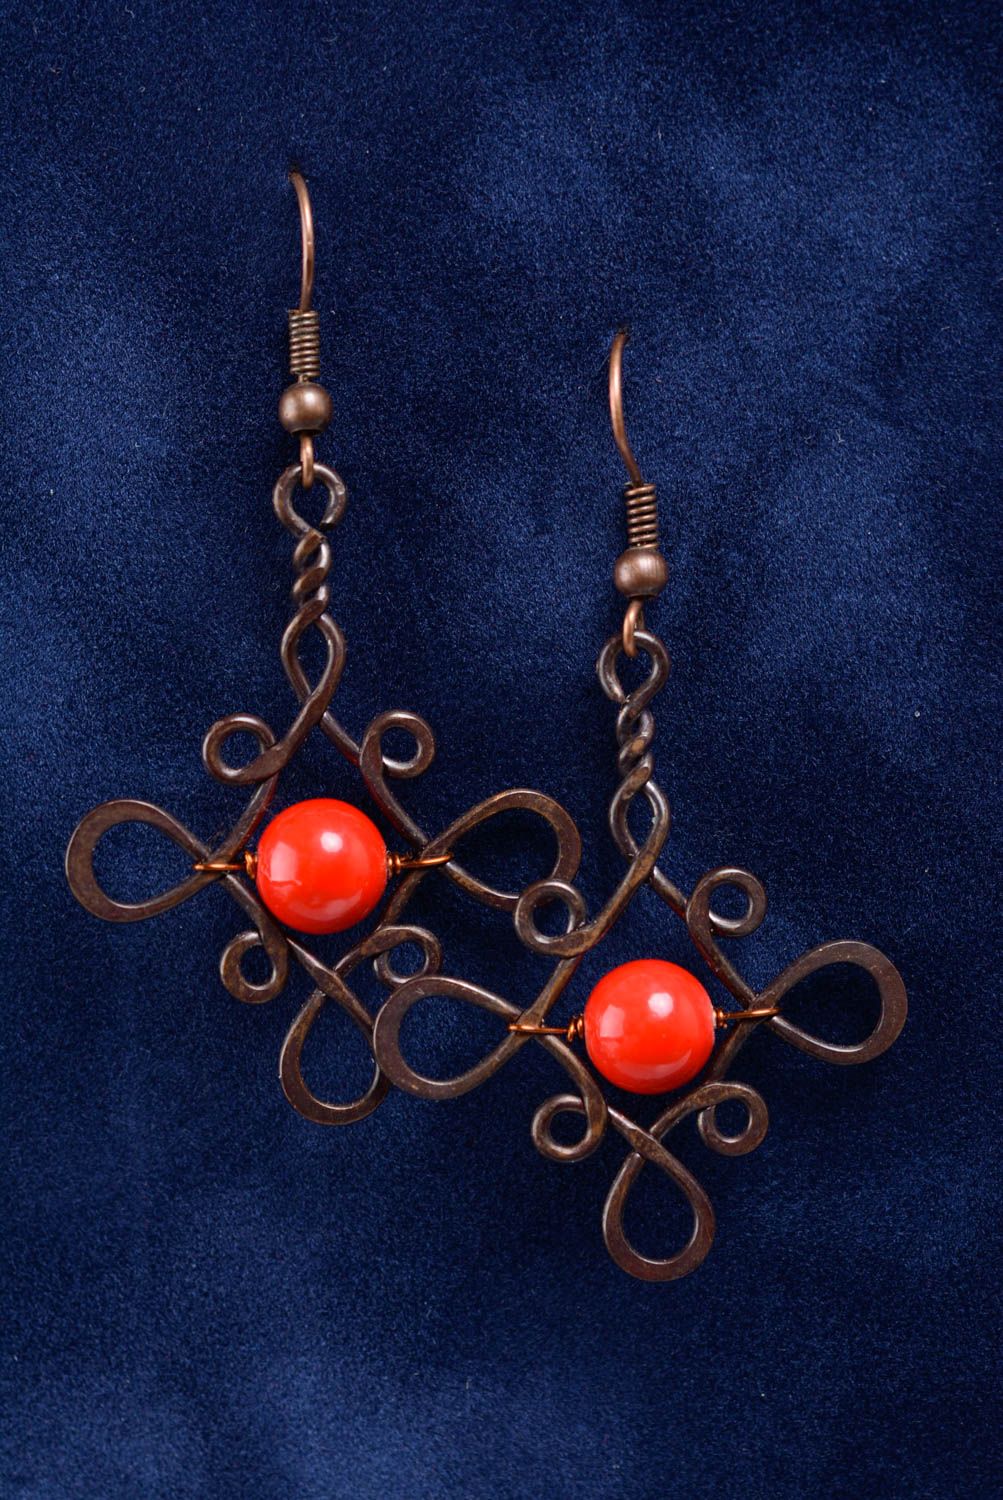 Handmade copper earrings with beads wire wrap technique beautiful women's jewelry photo 1